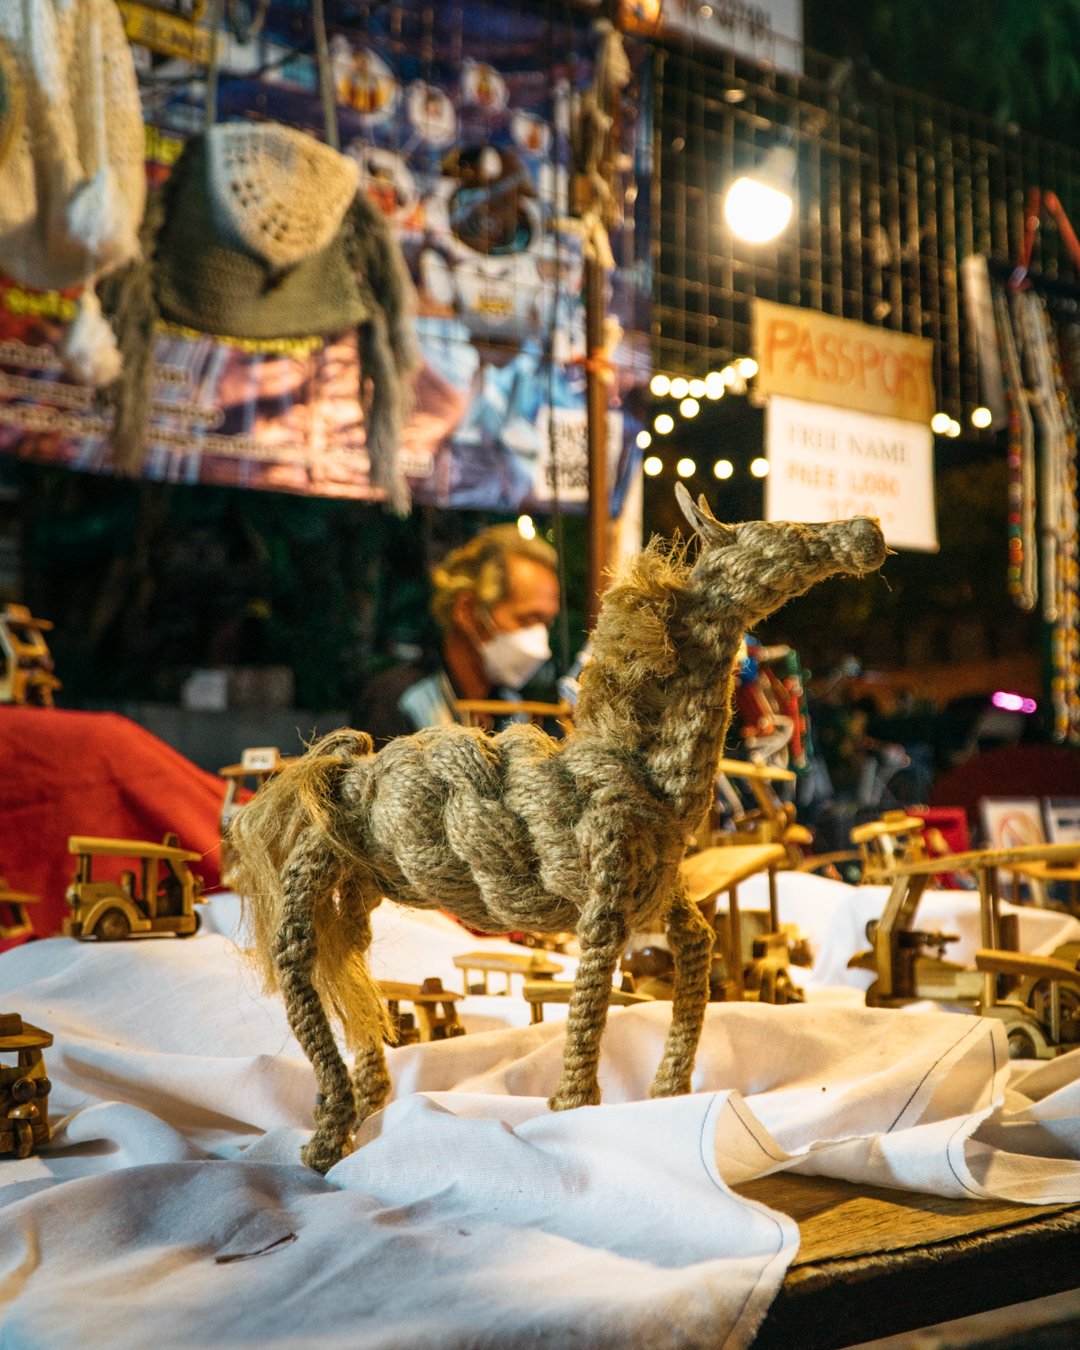 top things to do in Chiang Mai, Chiang Mai attractions - Sunday Night Market - street food stalls - Tha Phae Walking Street - Chiang Mai night markets